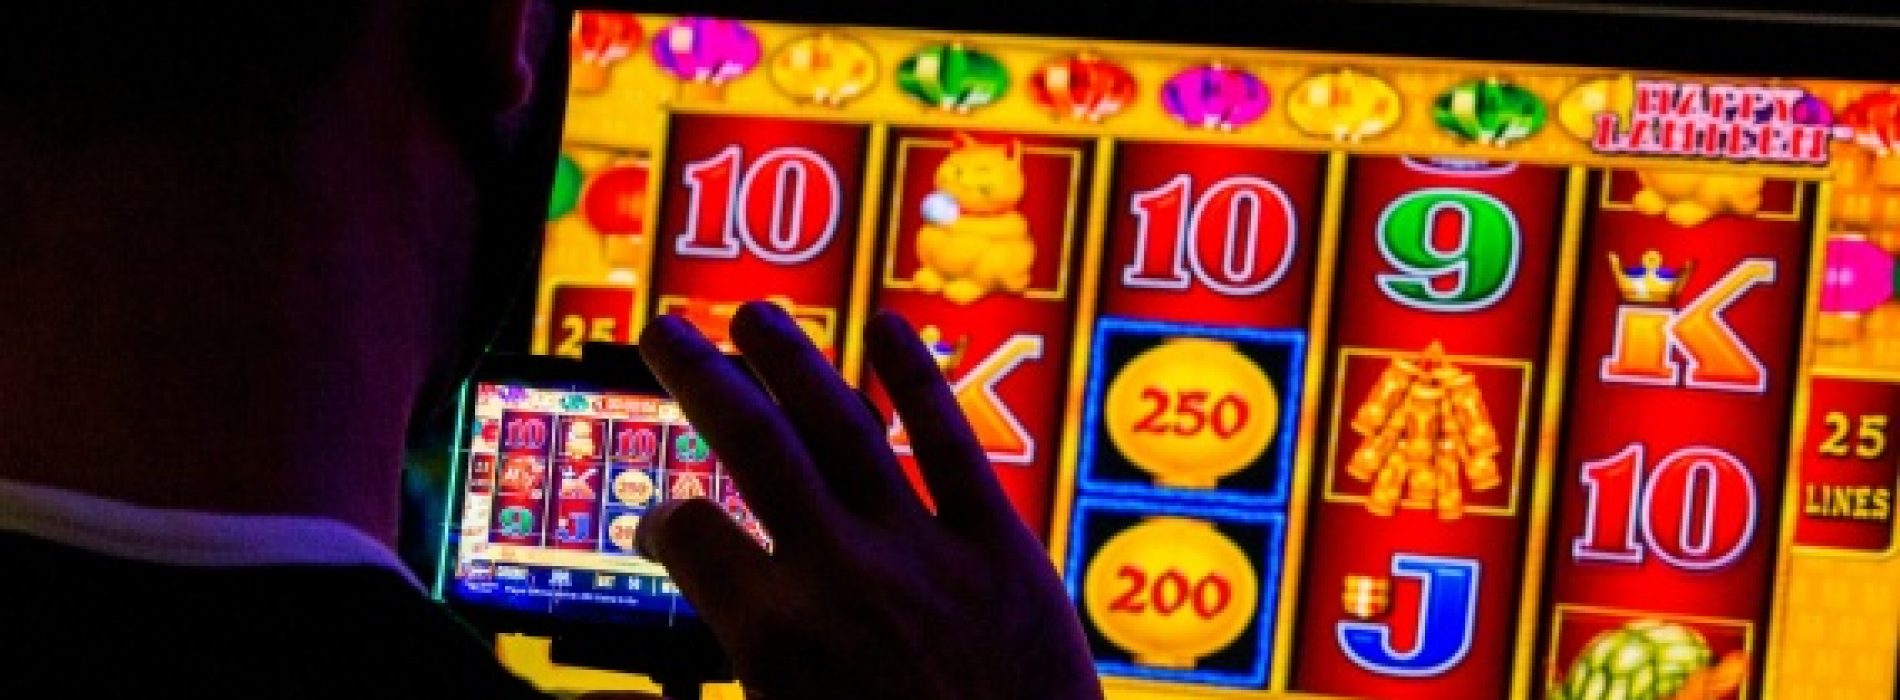 Best Online Slot Games For UK Players﻿